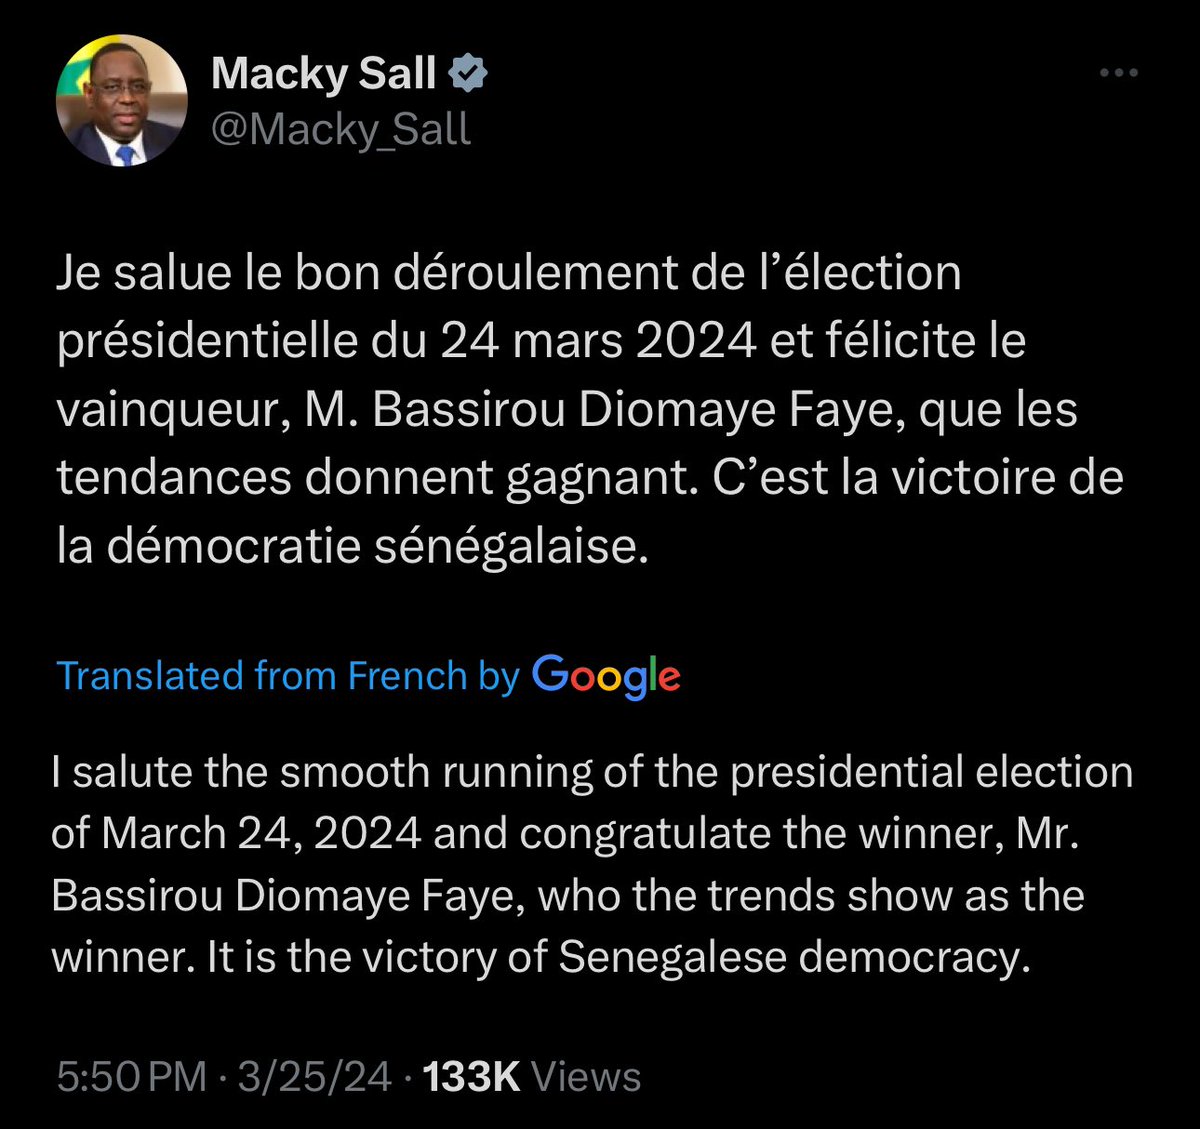 BREAKING: Incumbent Macky Sall congratulates Bassirou Diomaye Faye, 44 who is on track to be elected as the next president of Senegal. Sall’s term ends on April 2 and voters roundly rejected his chosen successor Amadou Bâ, 62